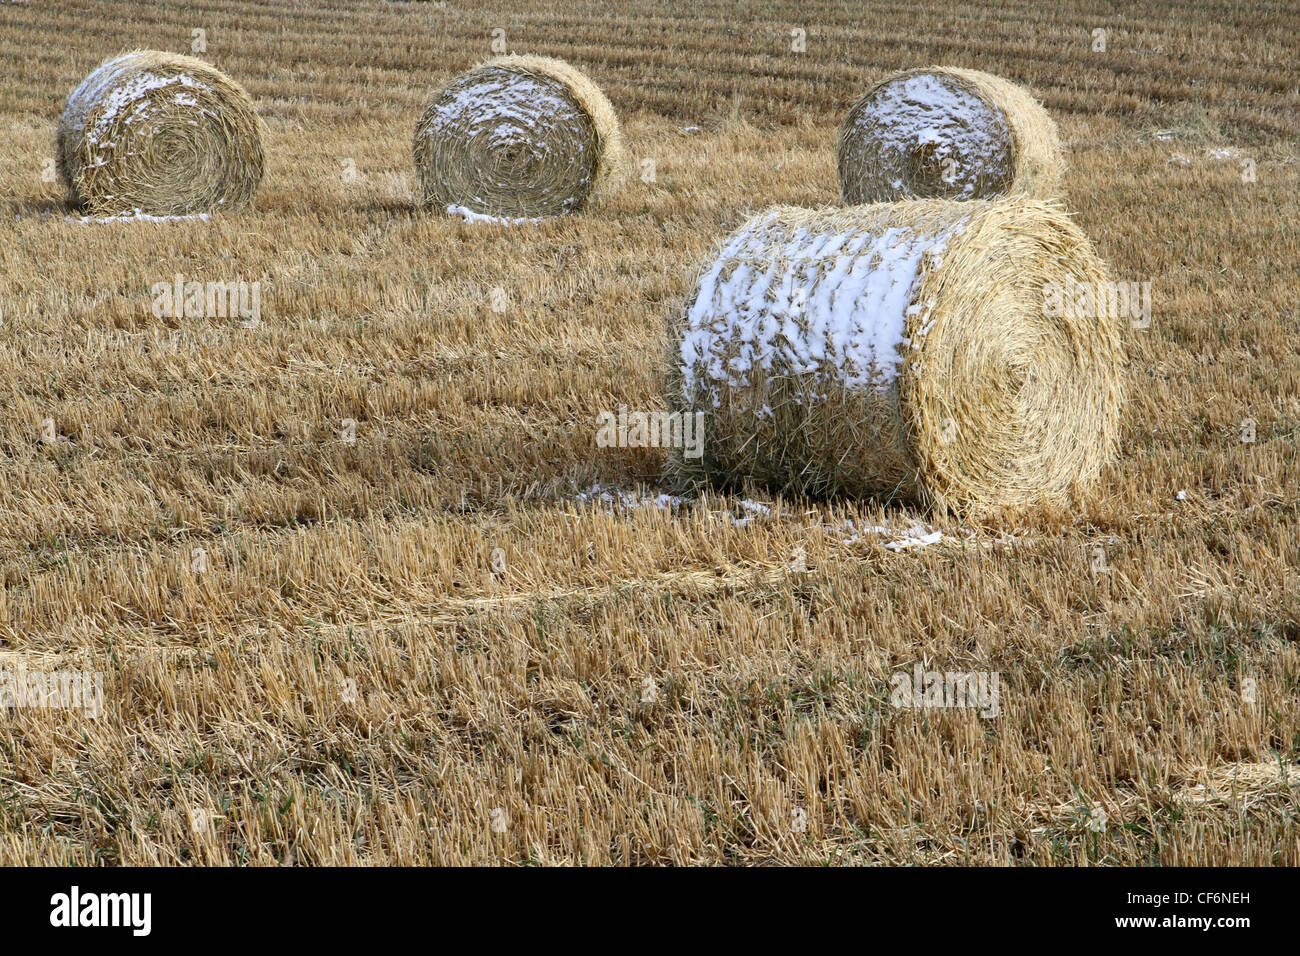 AGRICULTURE IN THE CANADIAN PRAIRIES GRAIN FARMING.  Round Bales of Straw partly covered with snow. Stock Photo